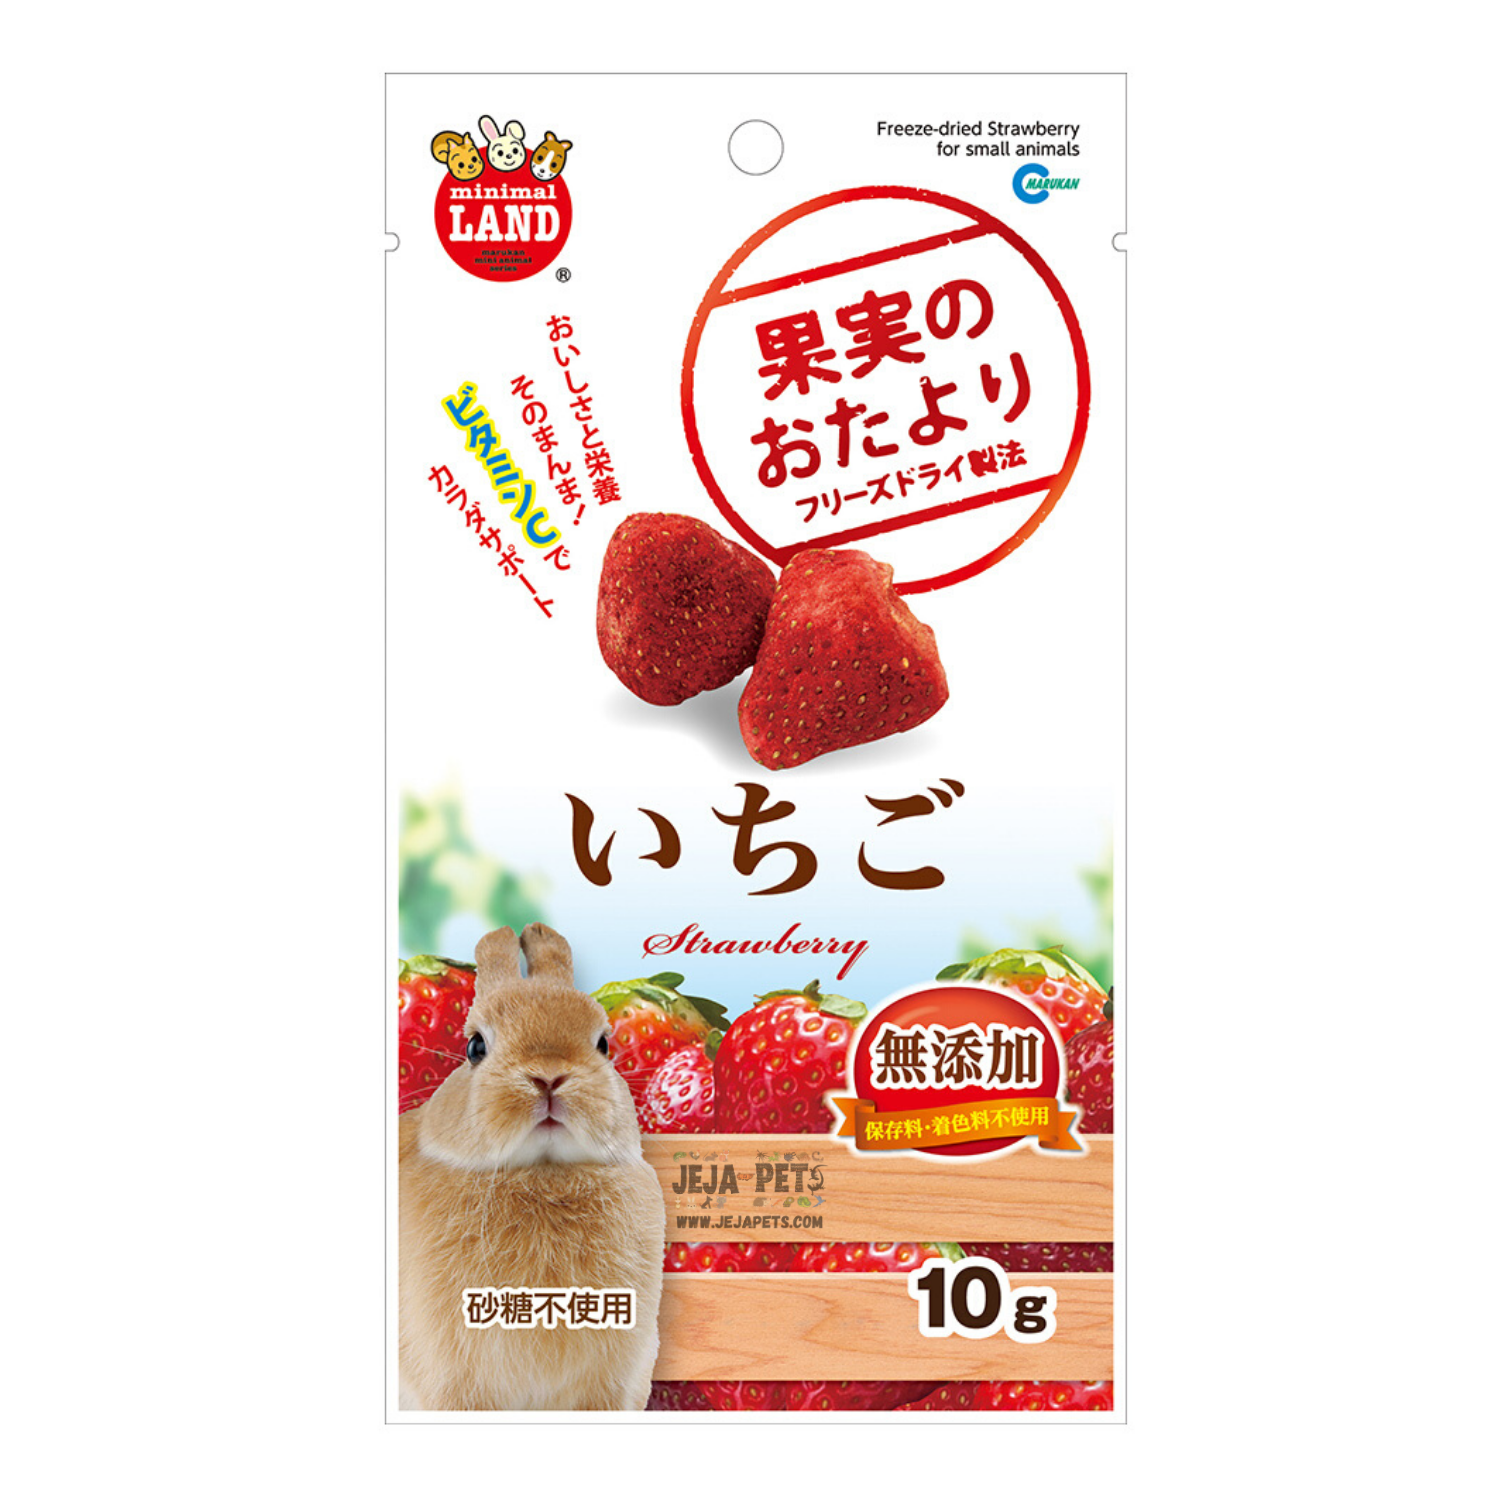 Marukan Freeze Dried Strawberry for Small Animals - 10g